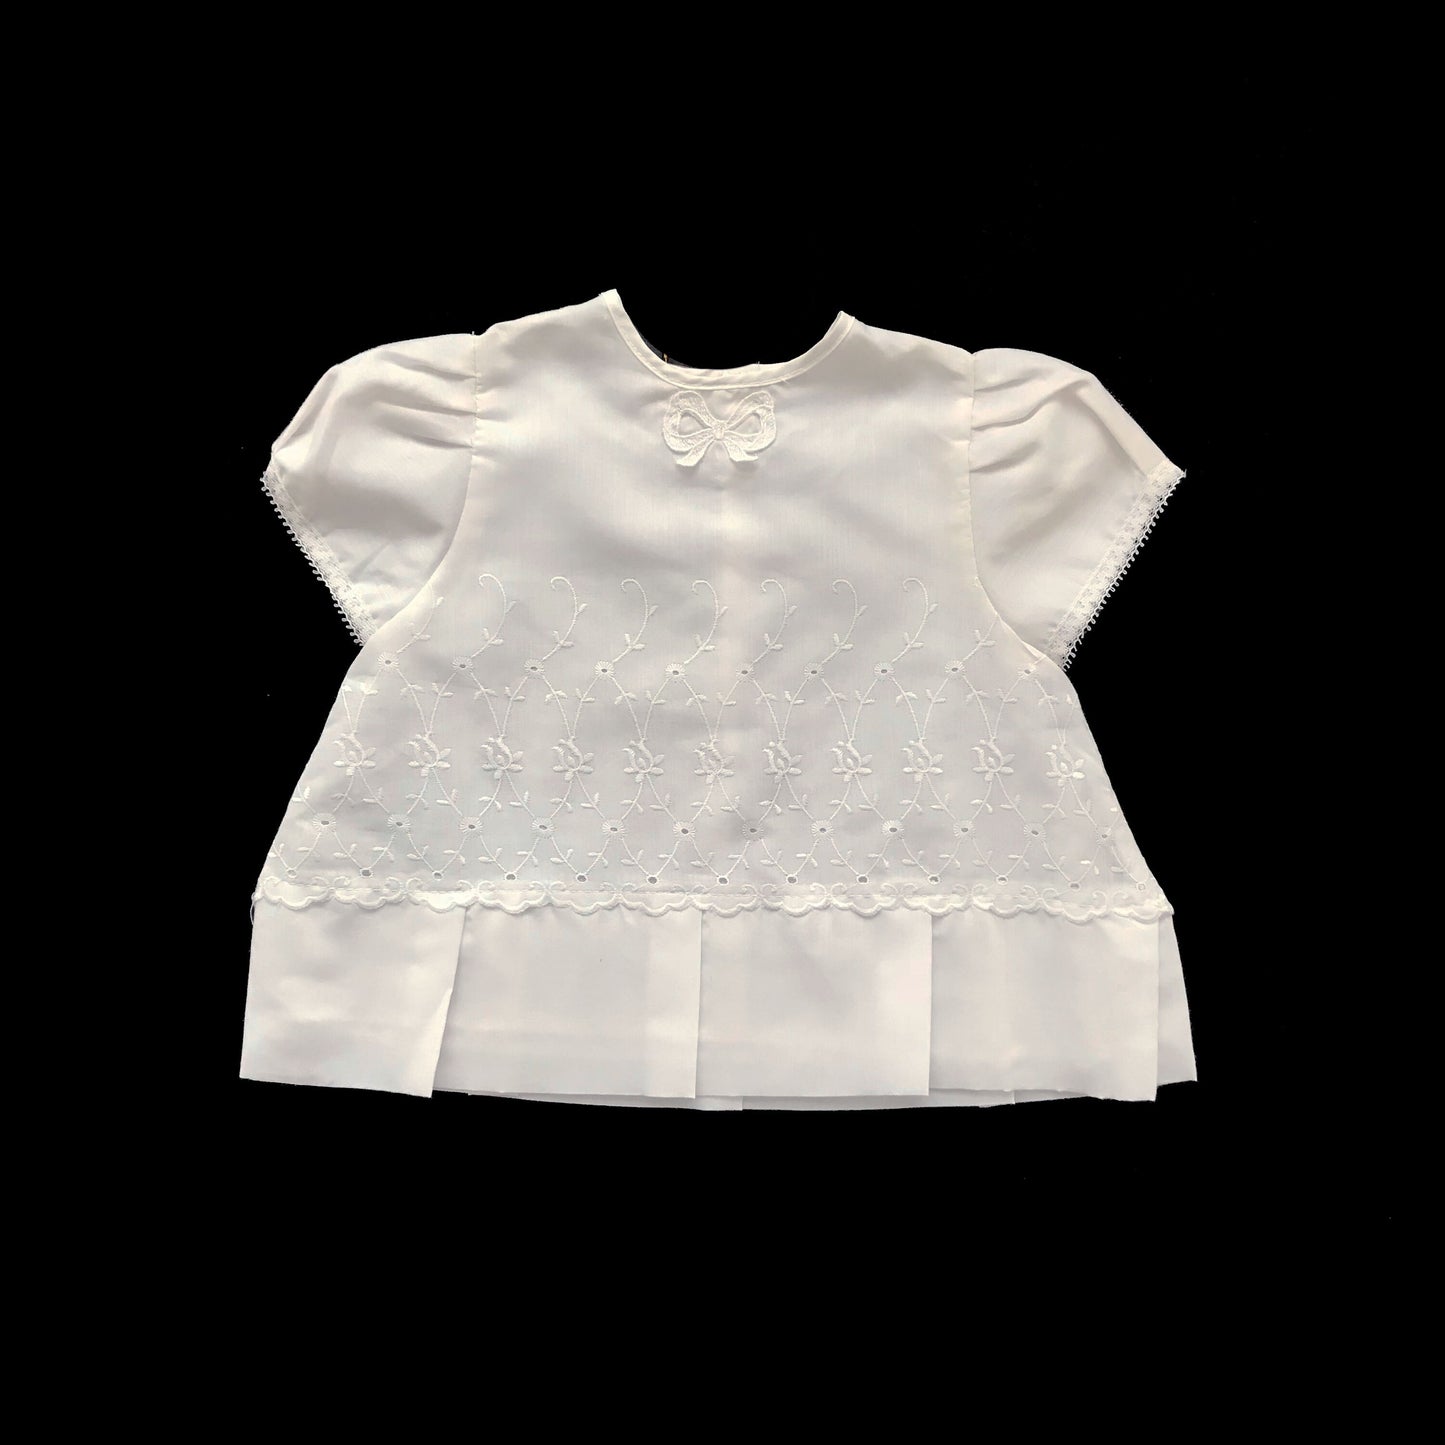 Vintage 60's "Broderie Anglaise" White Pleated Dress Made in France 0-3 Months